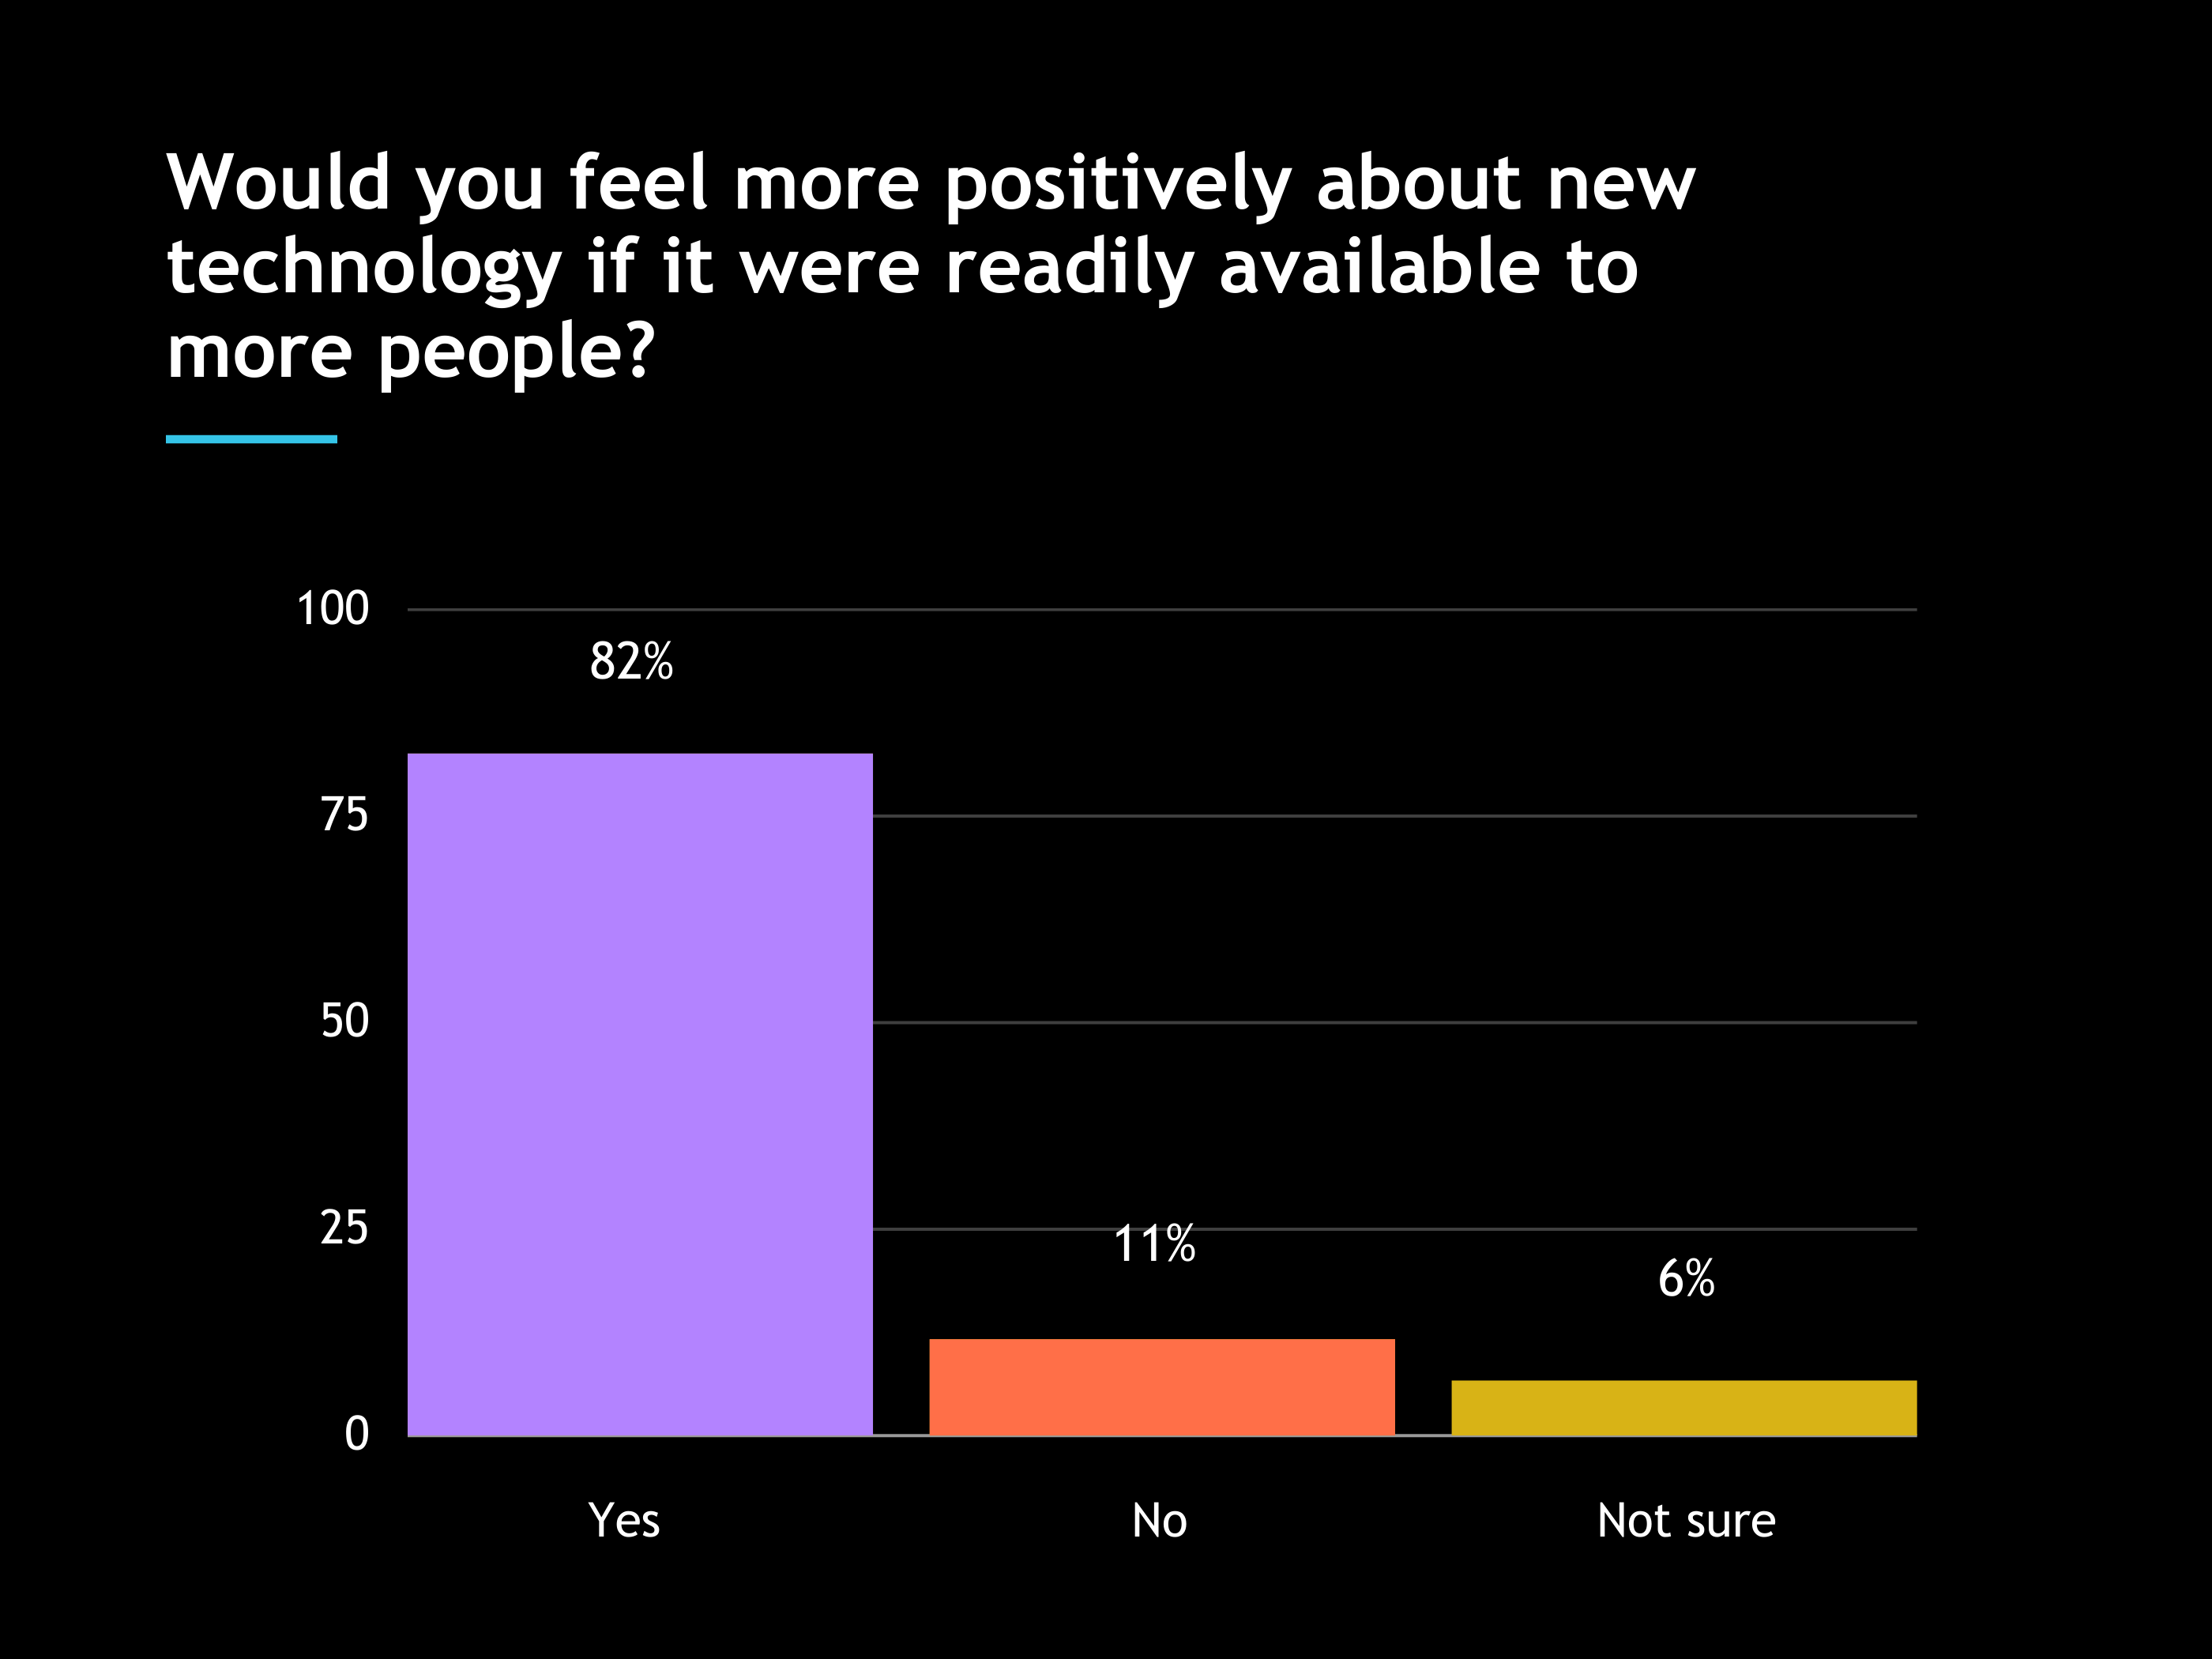 Would you feel more positively about new technology if it were readily available to more people?